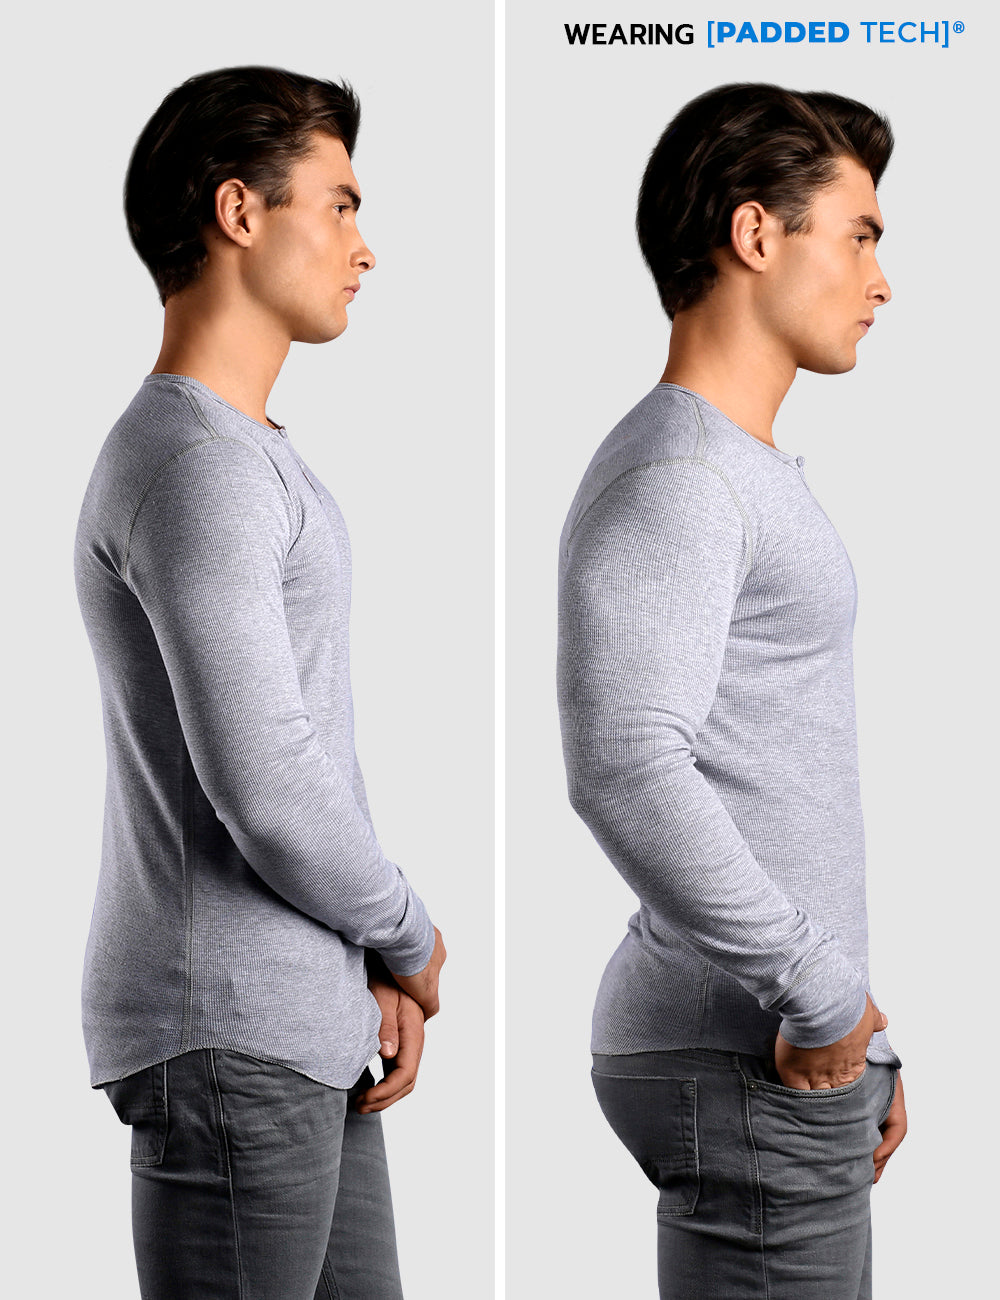 Buy Muscle Padded Shirt online